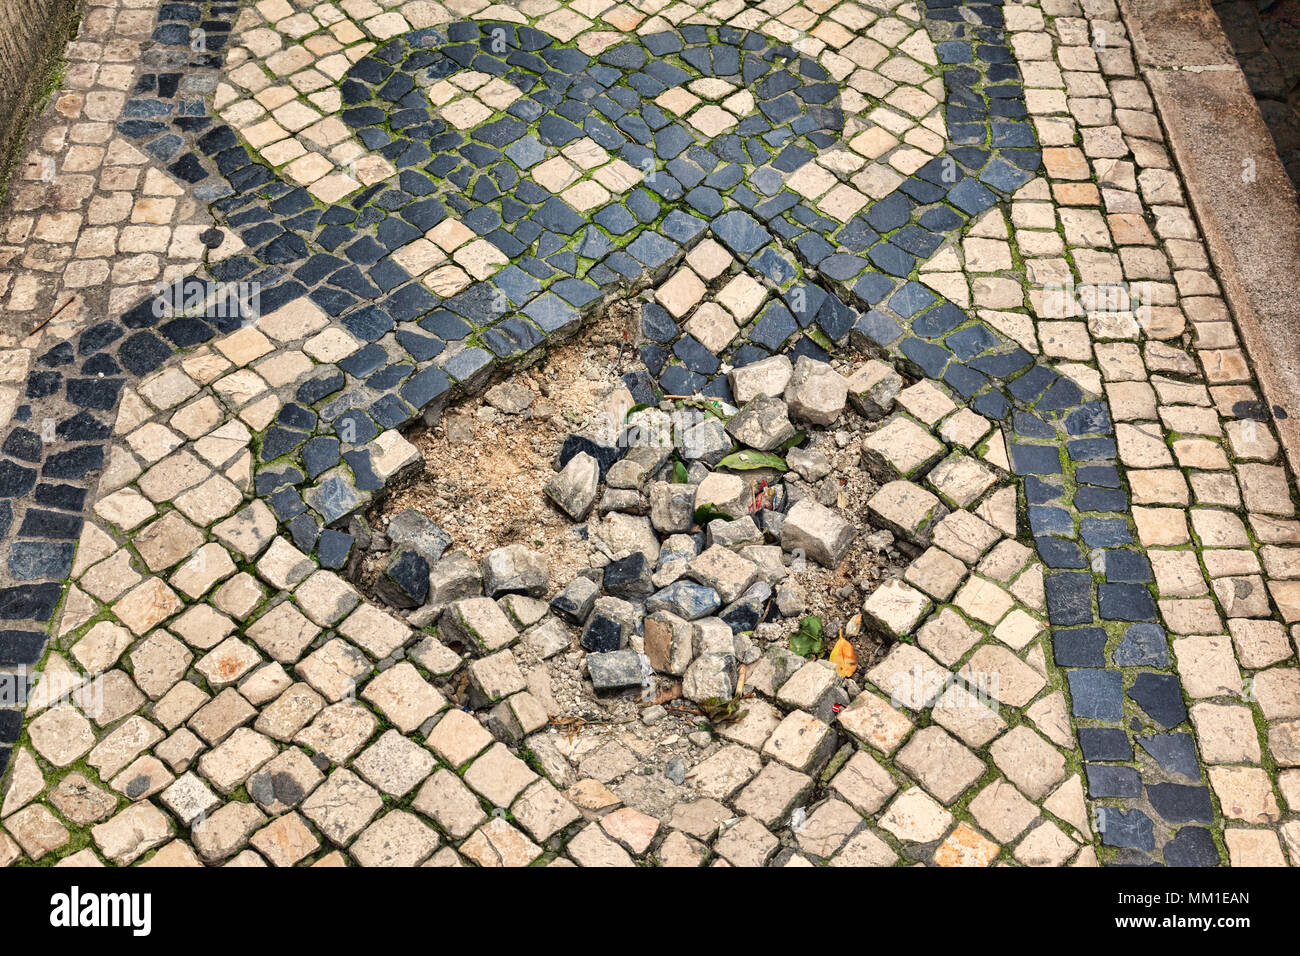 A section of Portuguese Pavement in Lisbon, Portugal, with a pot hole in it. Stock Photo